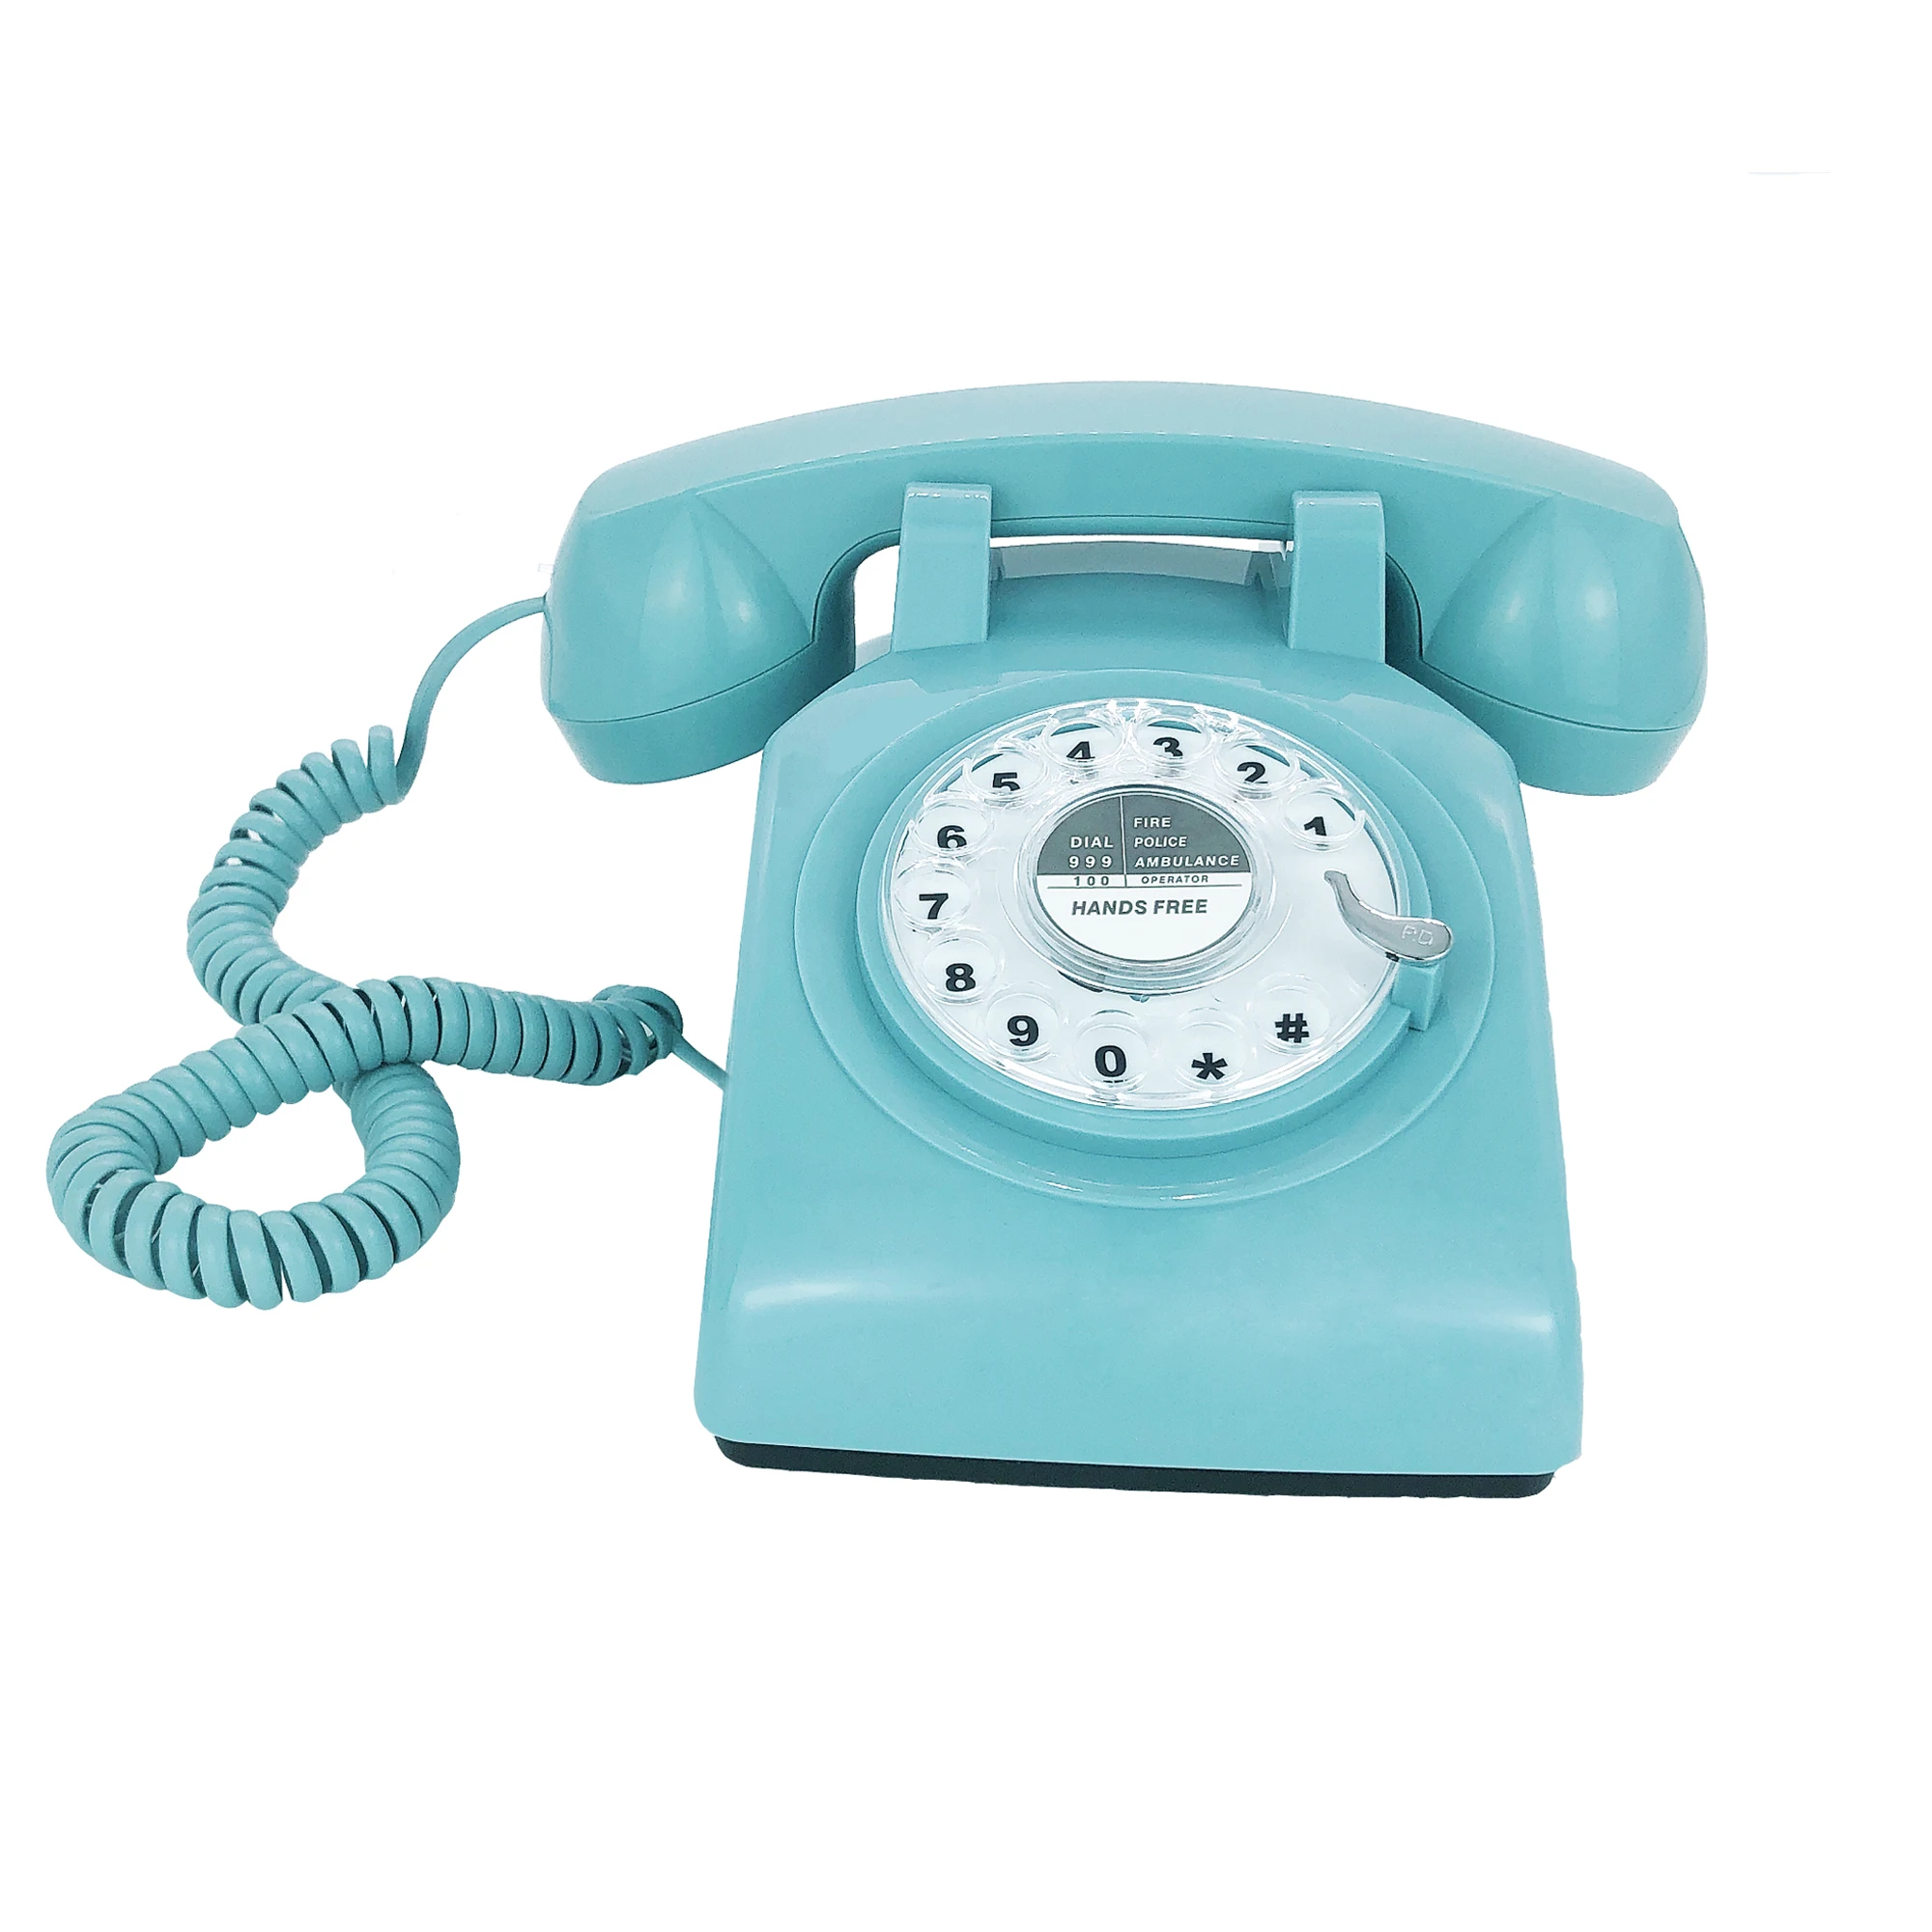 Blue Retro Telephone Classic Vintage Rotary Dial Hands Free Landline Phone for Home/Office/Hotel, Antique Phones for Senior Gift